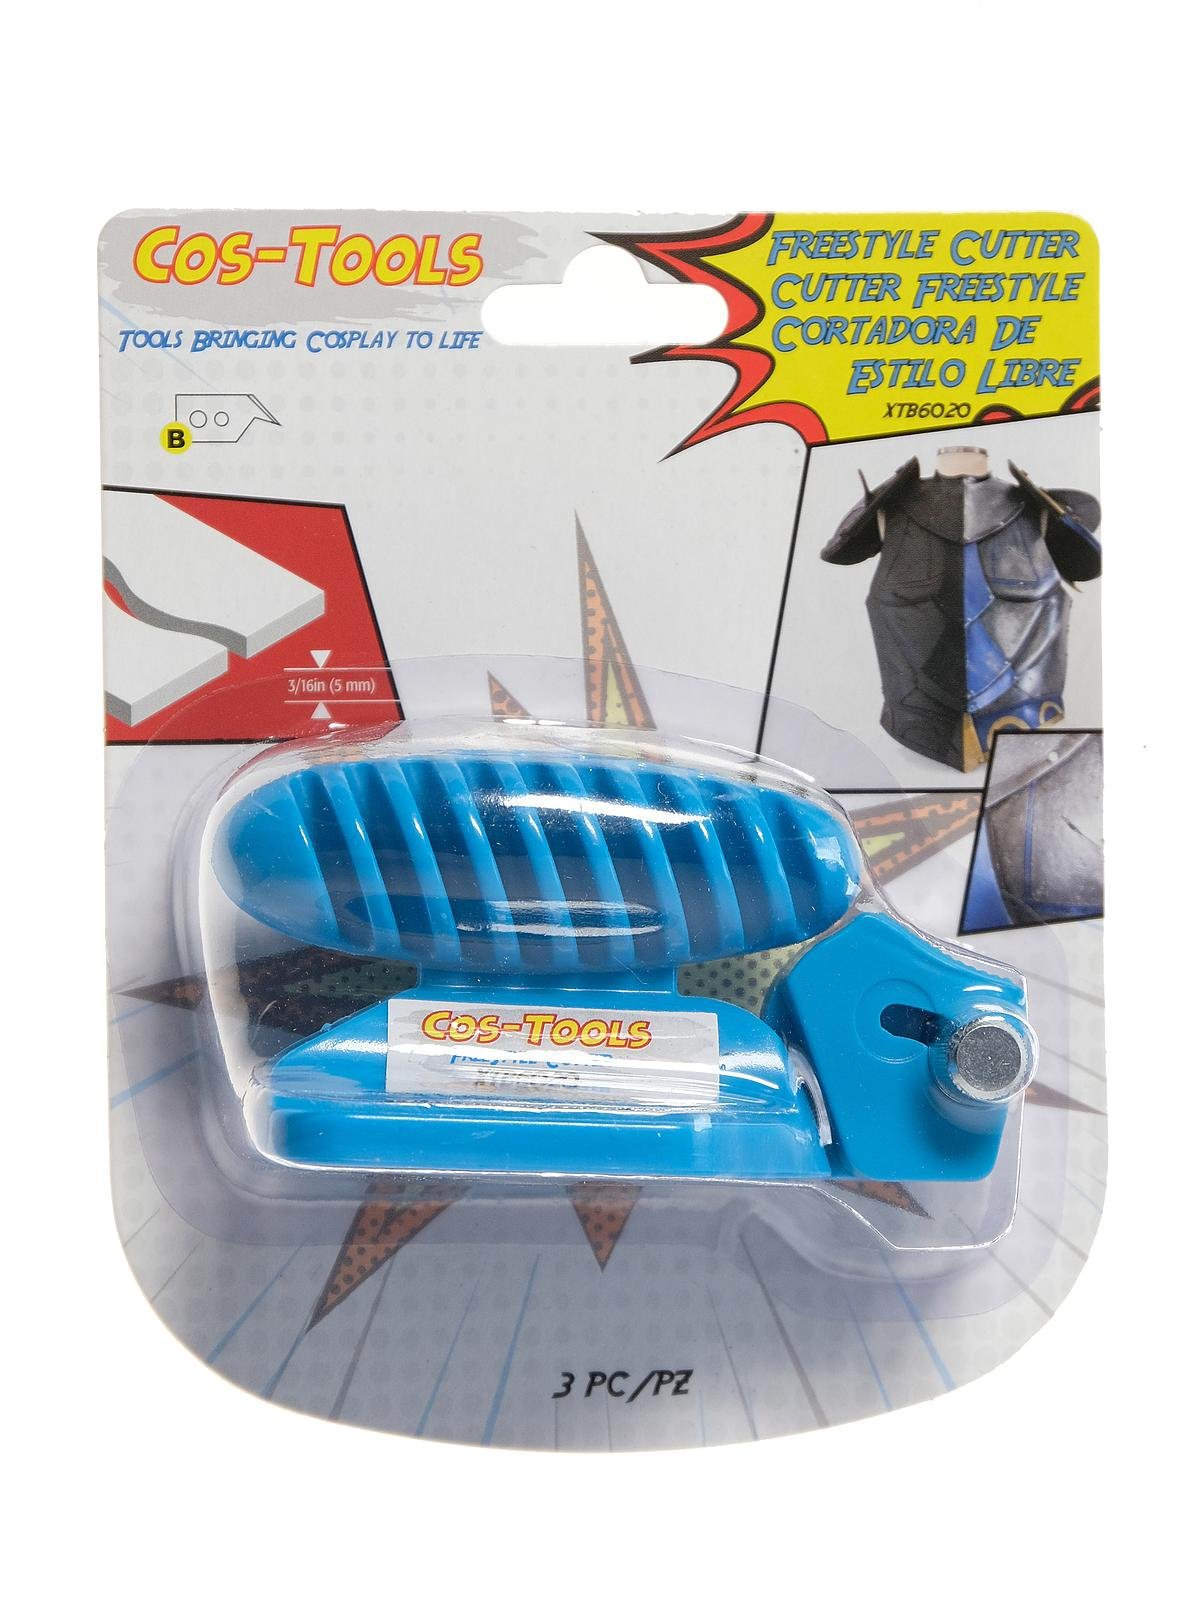 Cos-Tools - Freestyle Cutter